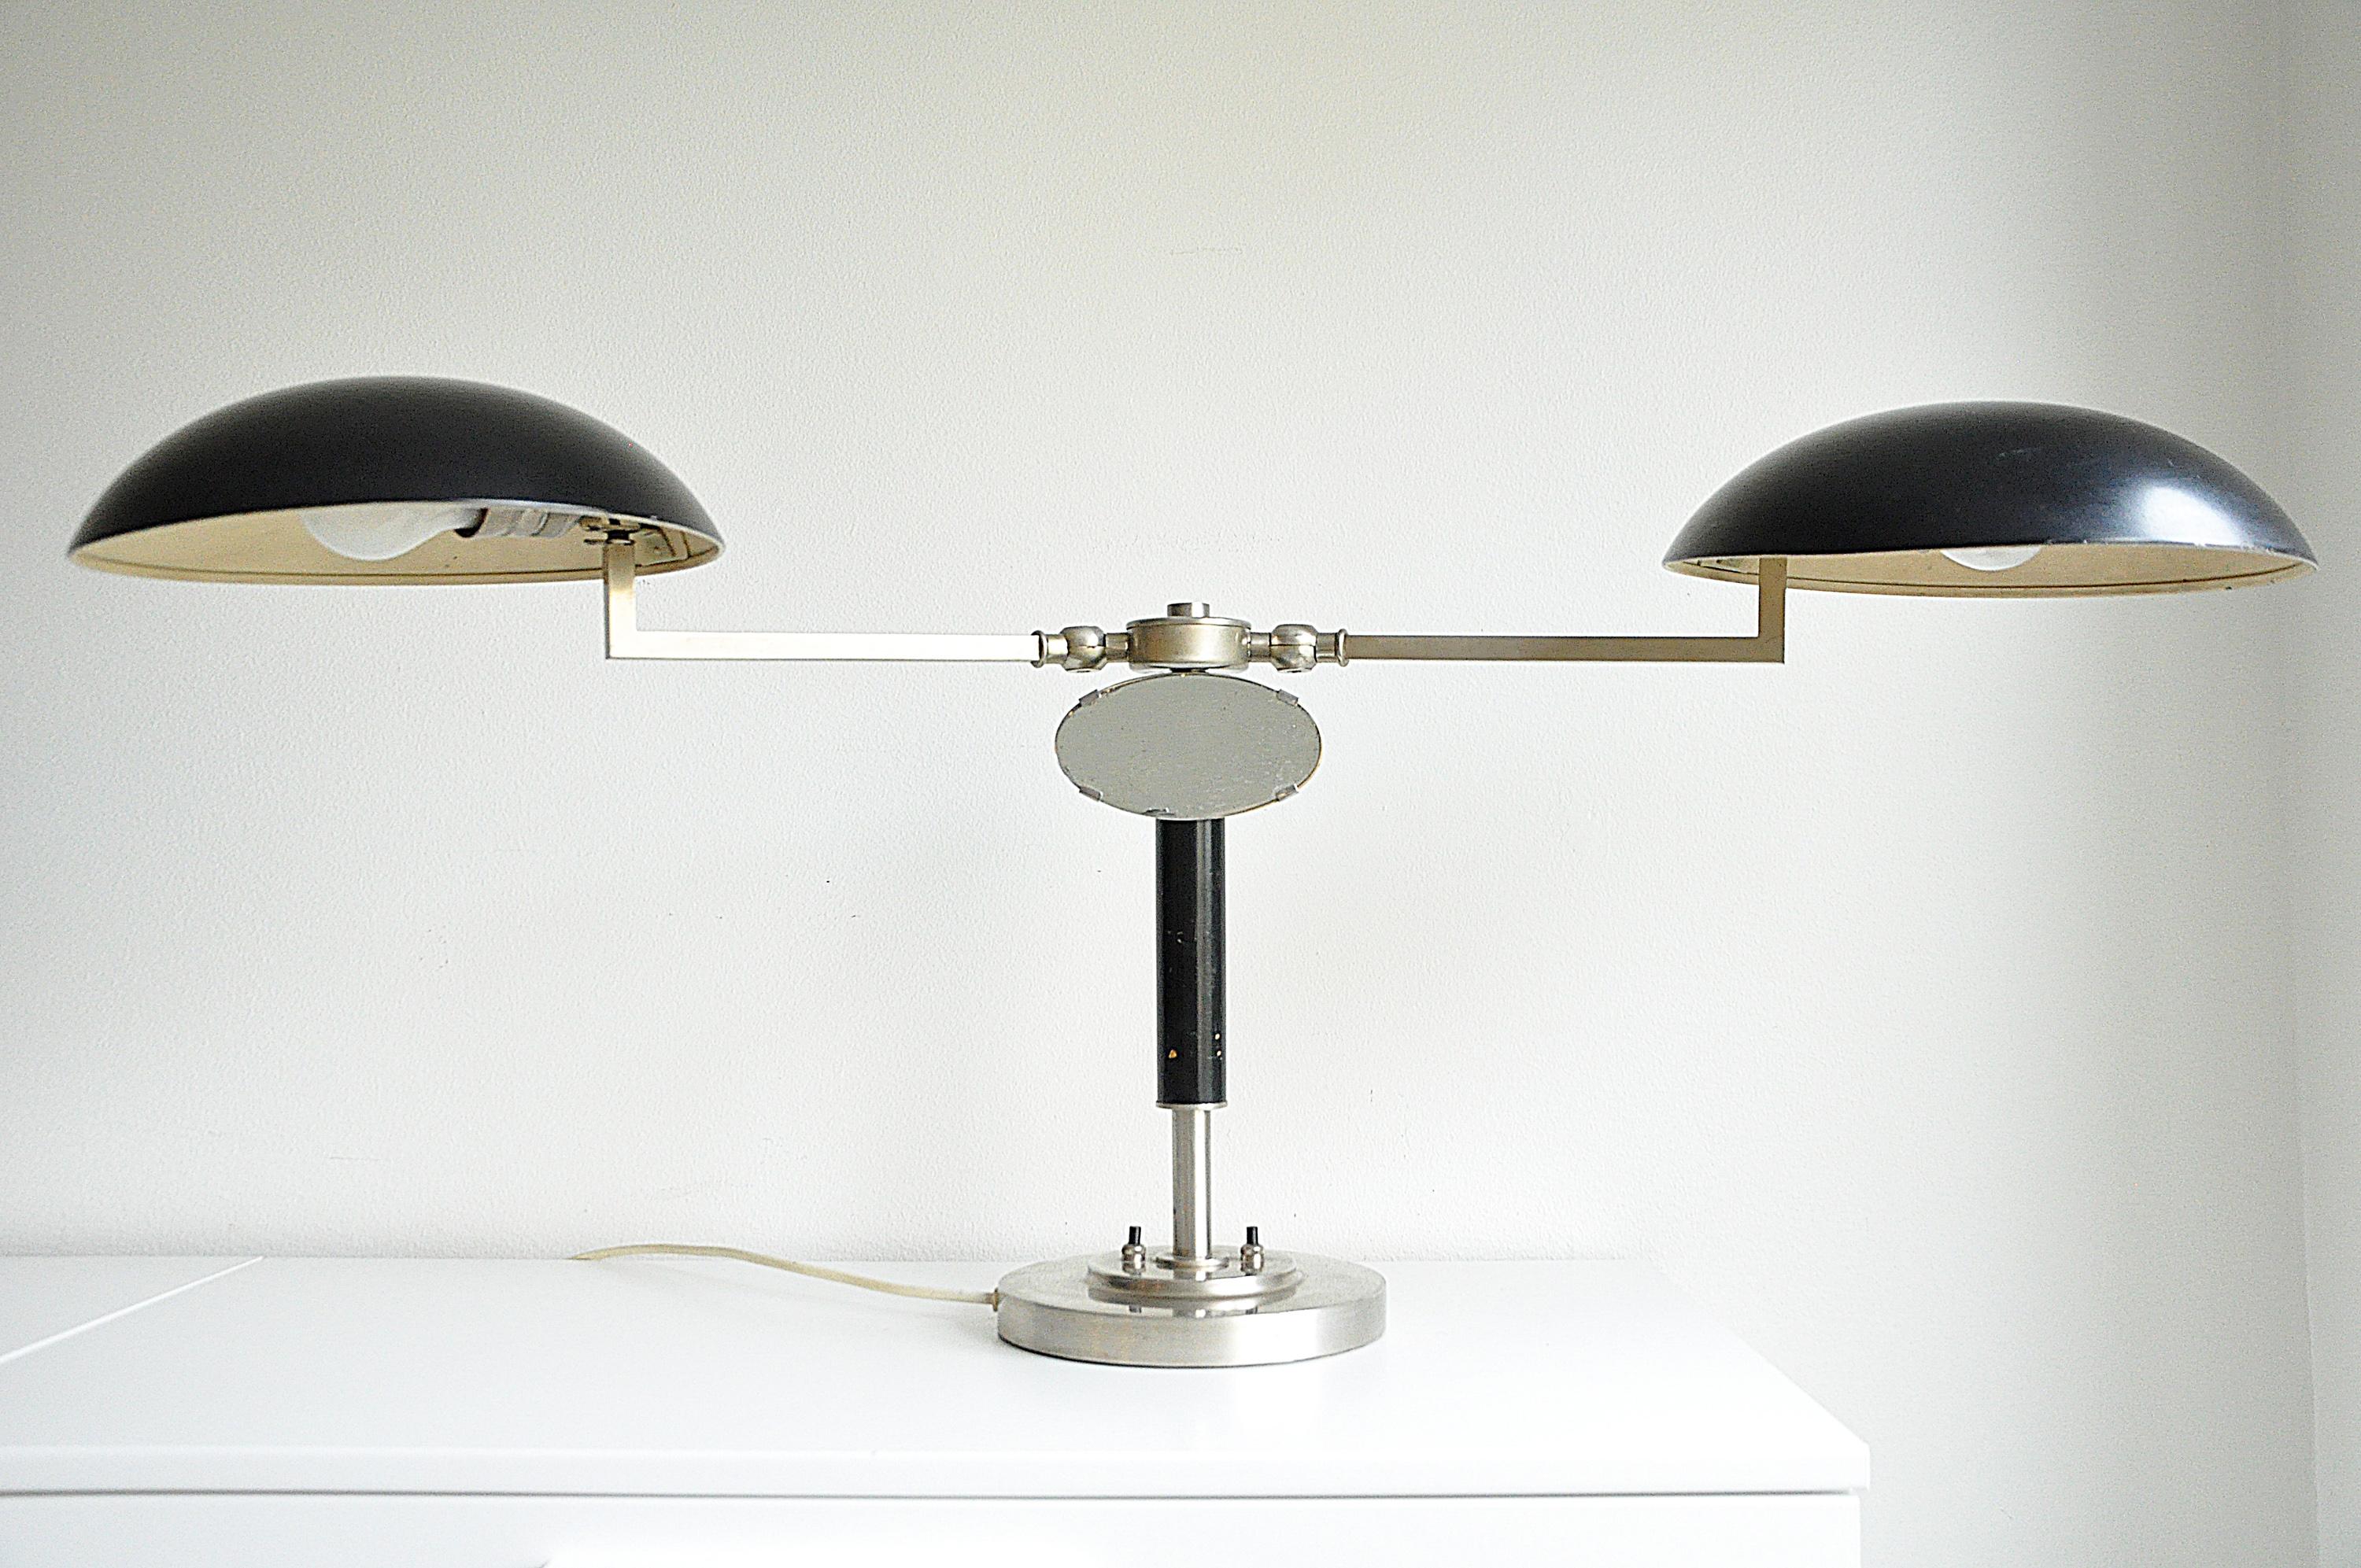 Rare two-arms table lamp with a small mirror, circa 1930s. 
Unknown maker. 
Adjustable shades. 
Width - shades folded inside ca 61 cm, 
Width - shades facing outwards ca 98 cm.

Original wiring. We recommend this lamp to be rewired following the